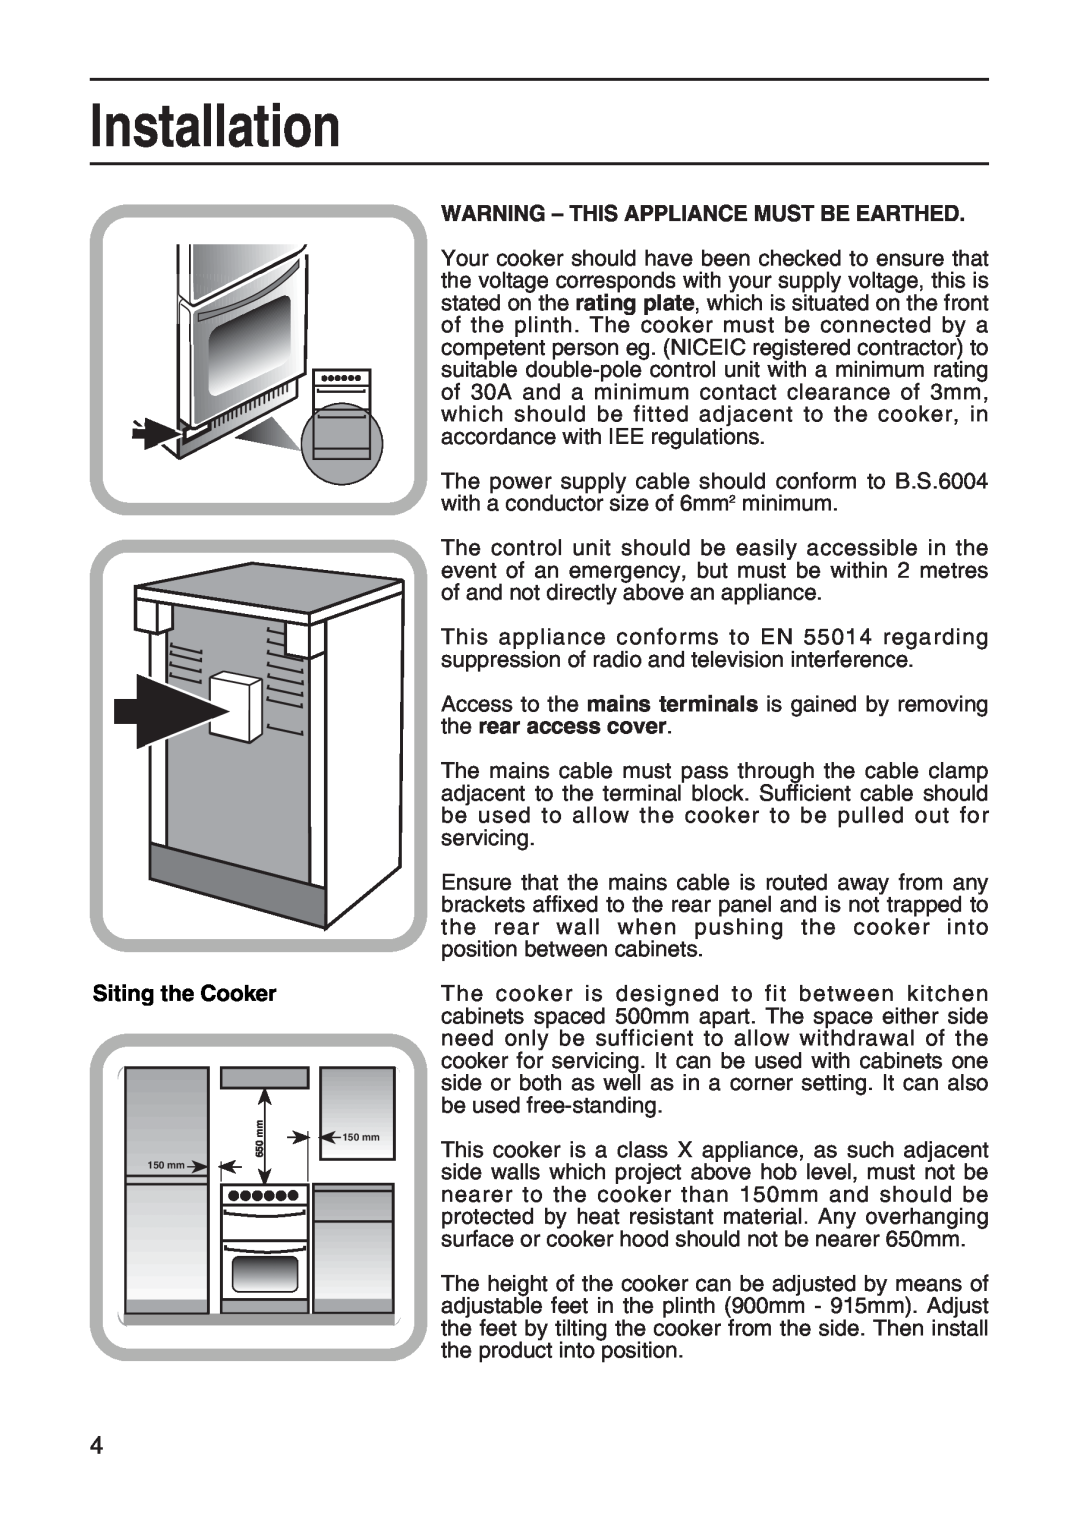 Hotpoint EW41 manual Installation, Siting the Cooker, Warning - This Appliance Must Be Earthed 